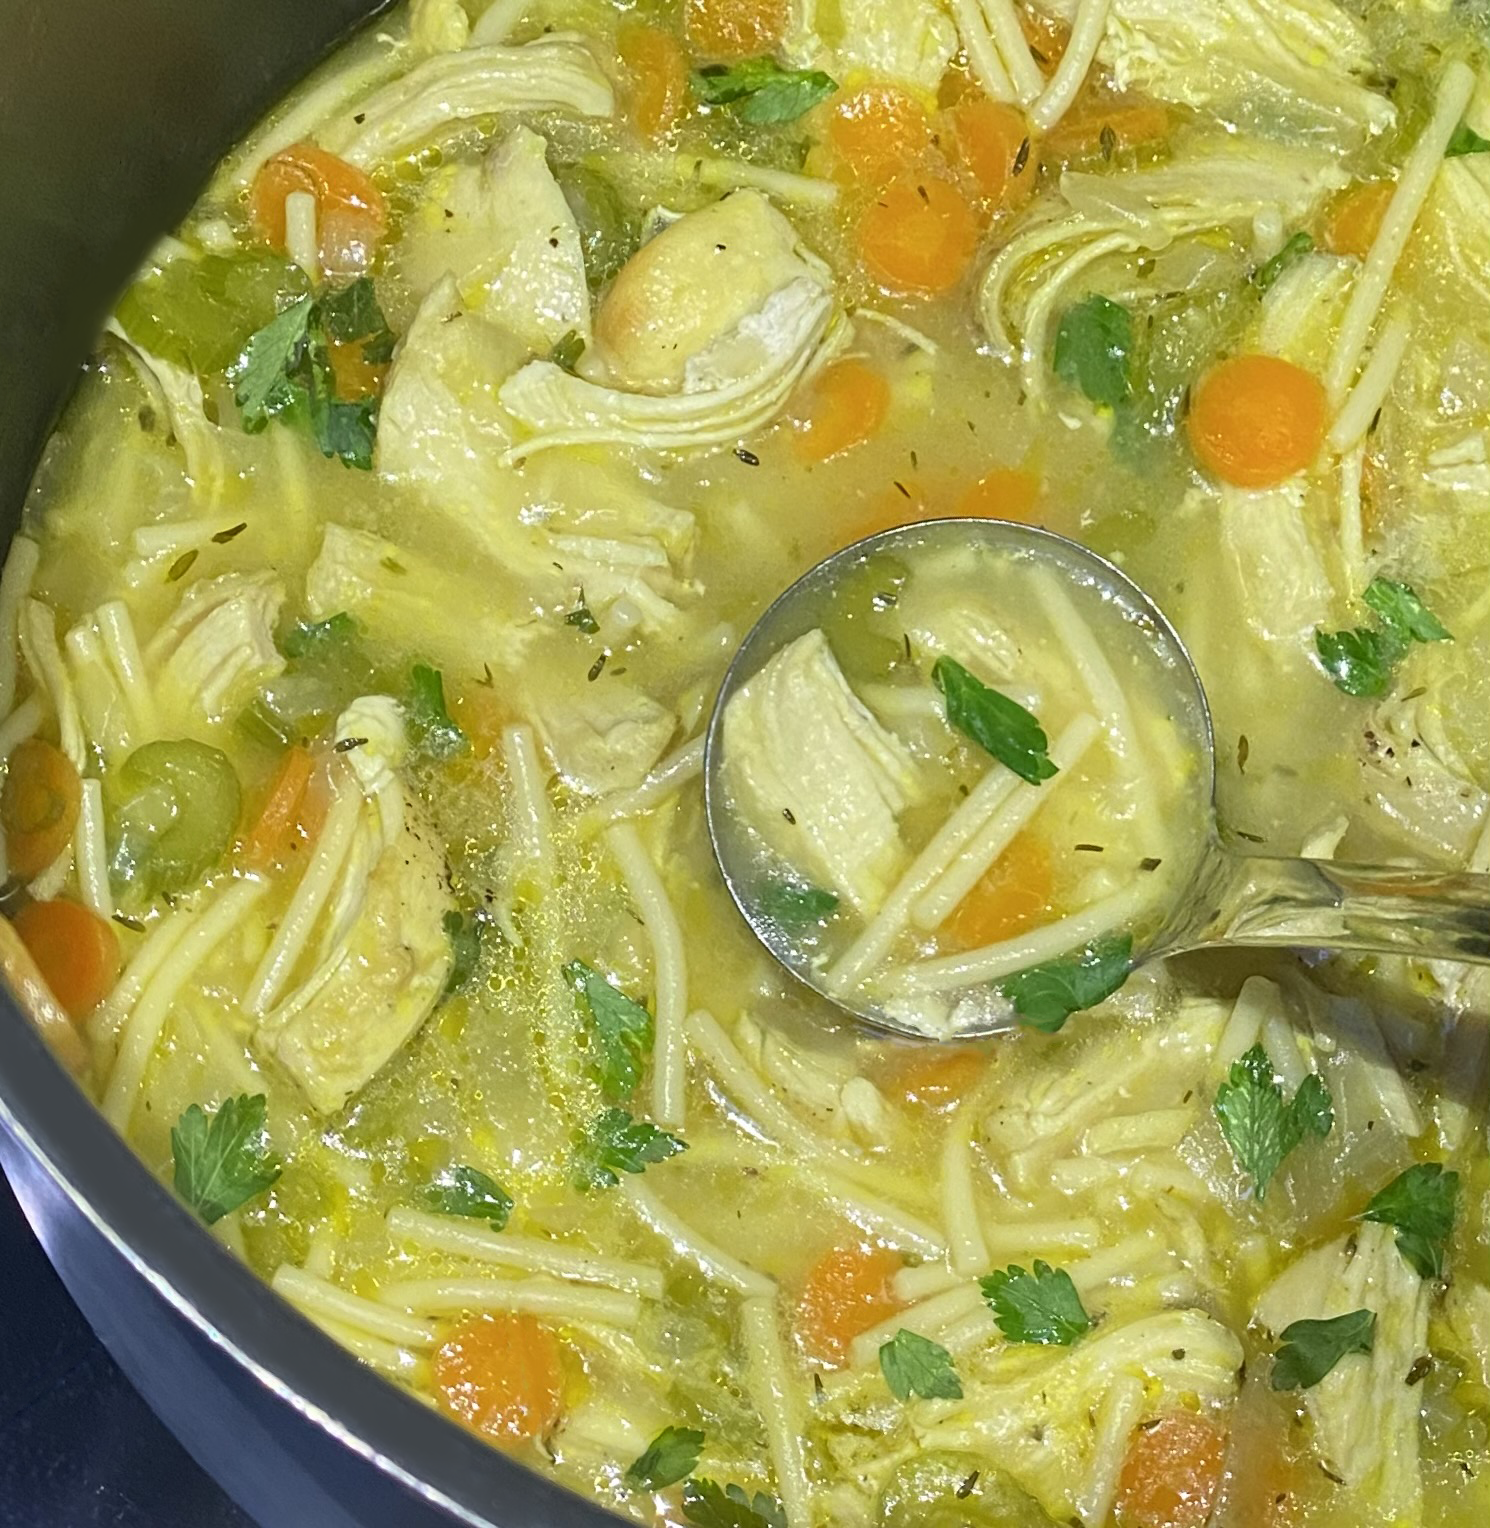 https://www.cookingmamas.com/wp-content/uploads/2021/02/Old-Fashioned-Chicken-Noodle-Soup-7.png